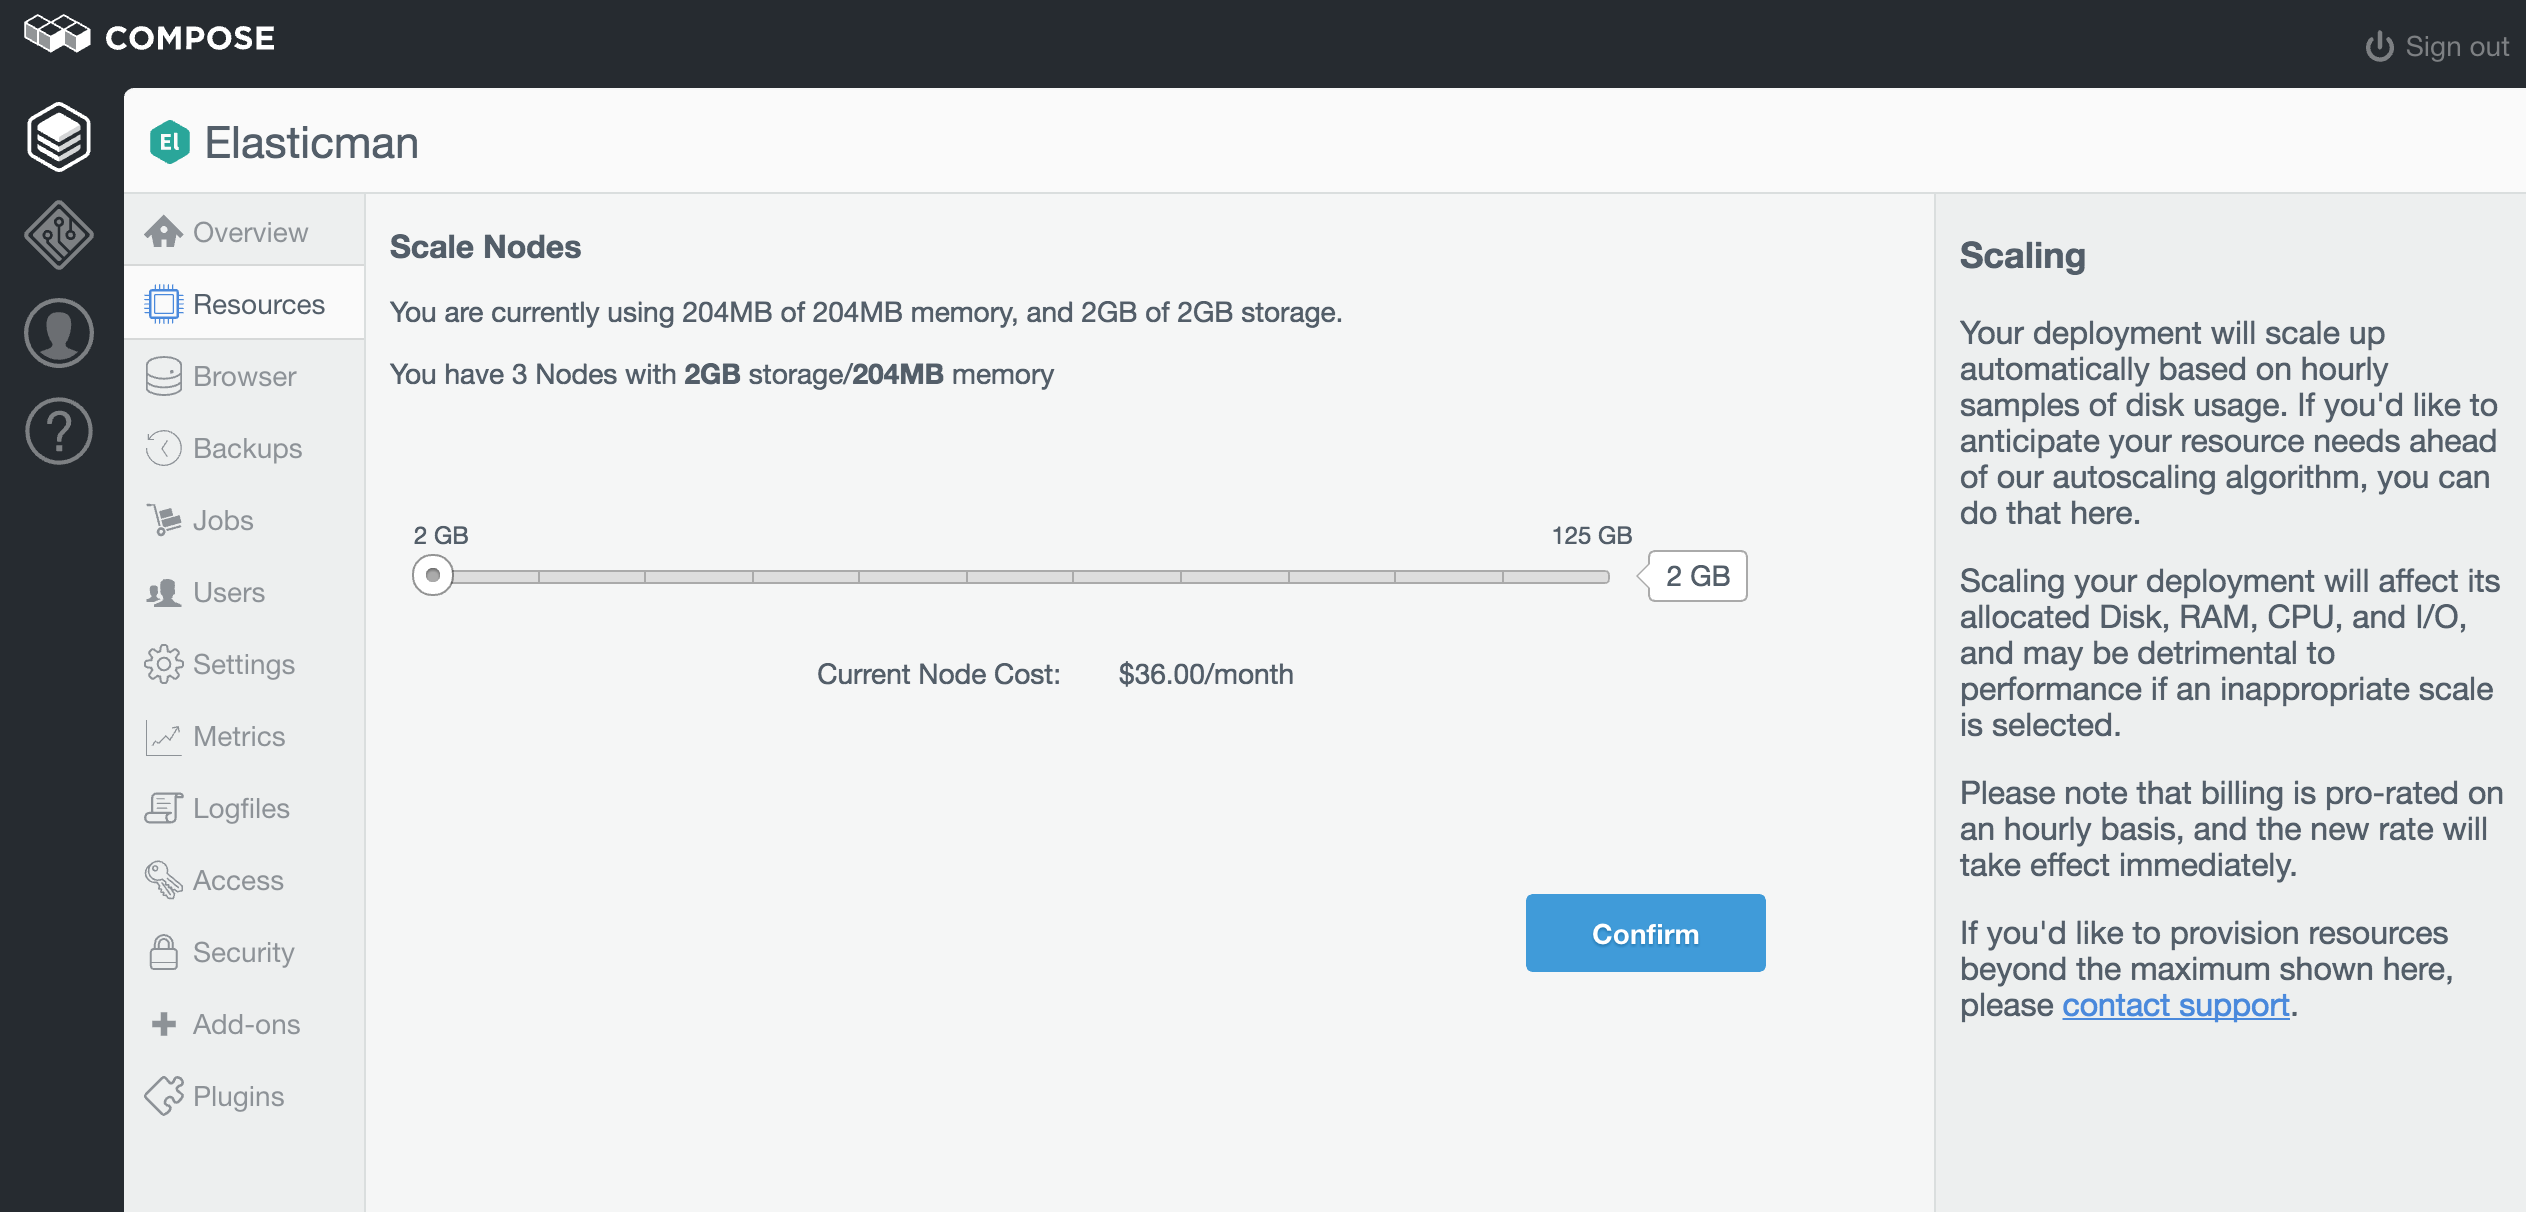 A view of the scale slider, specifically the slider for Elasticsearch.